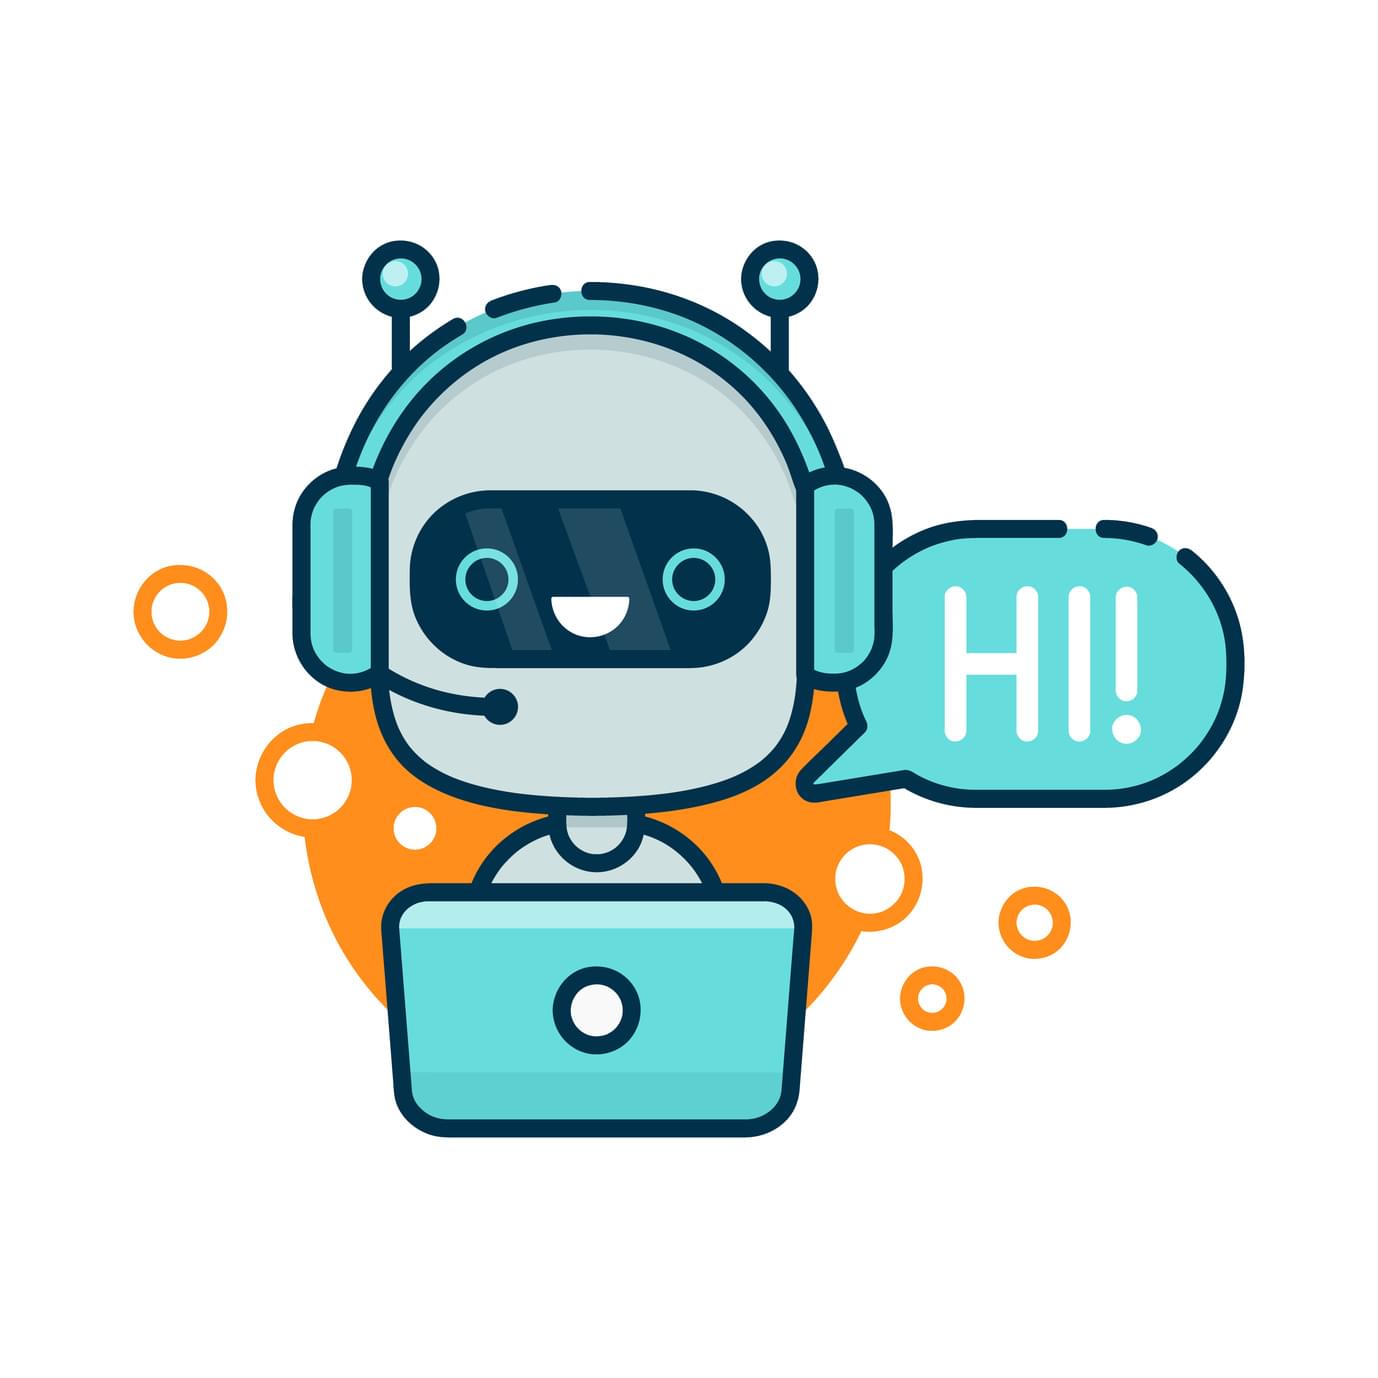 Dawn of the Chatbots: What Do Consumers Want and Expect? | TechnologyAdvice